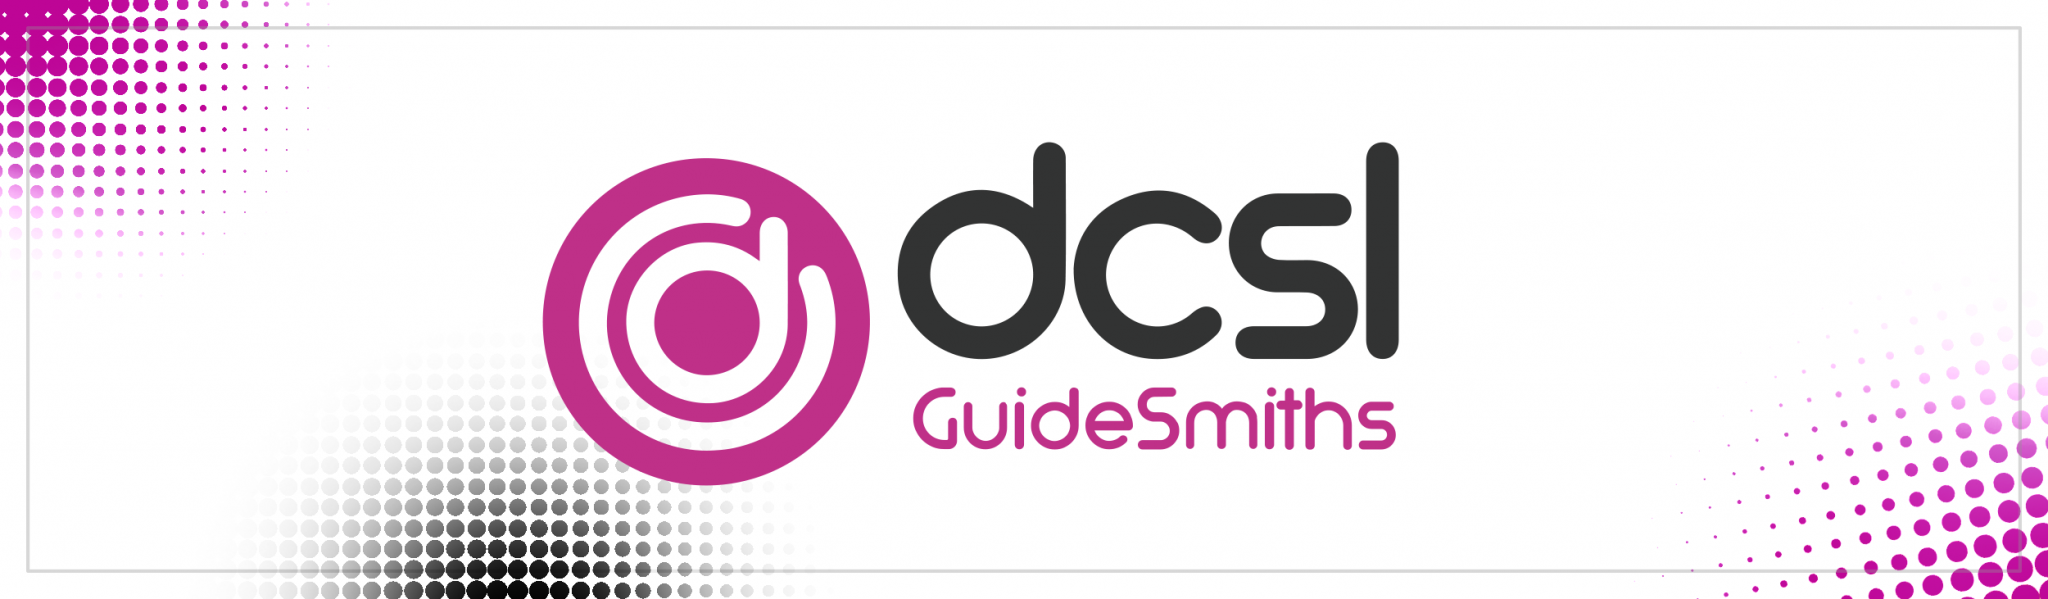 DCSL Software completes transformational acquisition of GuideSmiths in £12m deal to become DCSL GuideSmiths  - Featured image